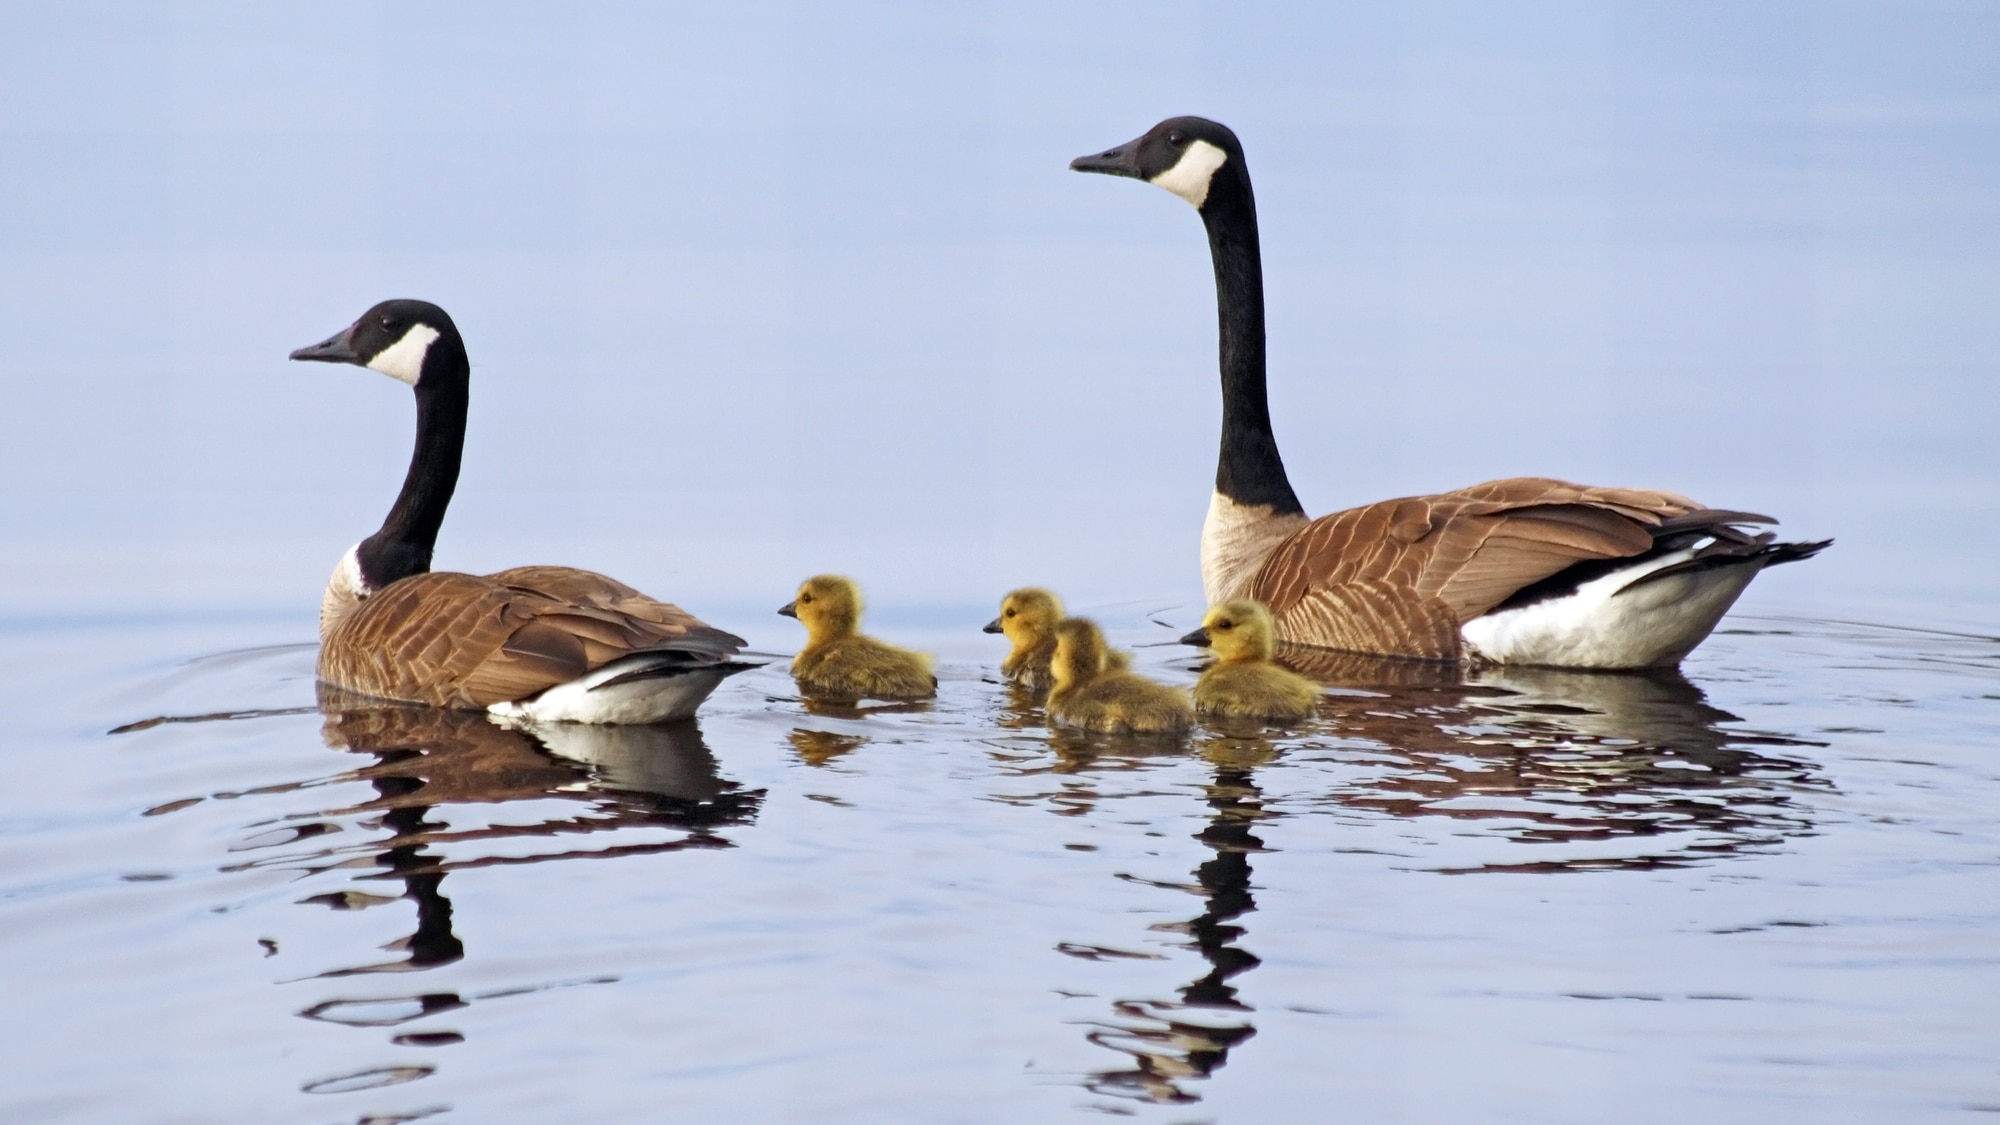 Why are geese protected?